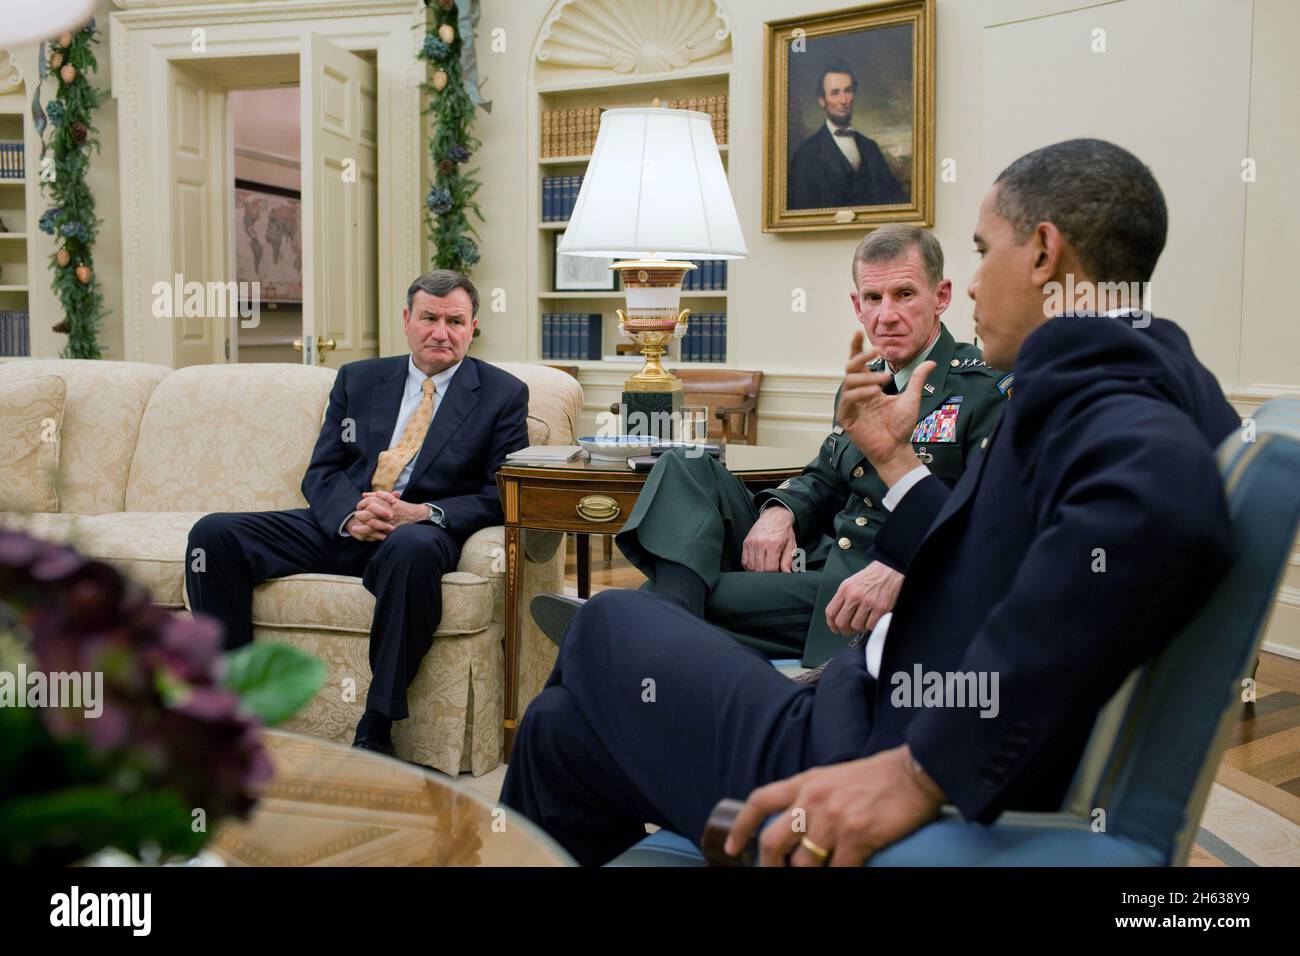 President Barack Obama meets with United States Ambassador to Afghanistan Karl Eikenberry, left, and General Stanley McChrystal, Commander, International Security Assistance Force, in the Oval Office, Dec. 7, 2009. Stock Photo